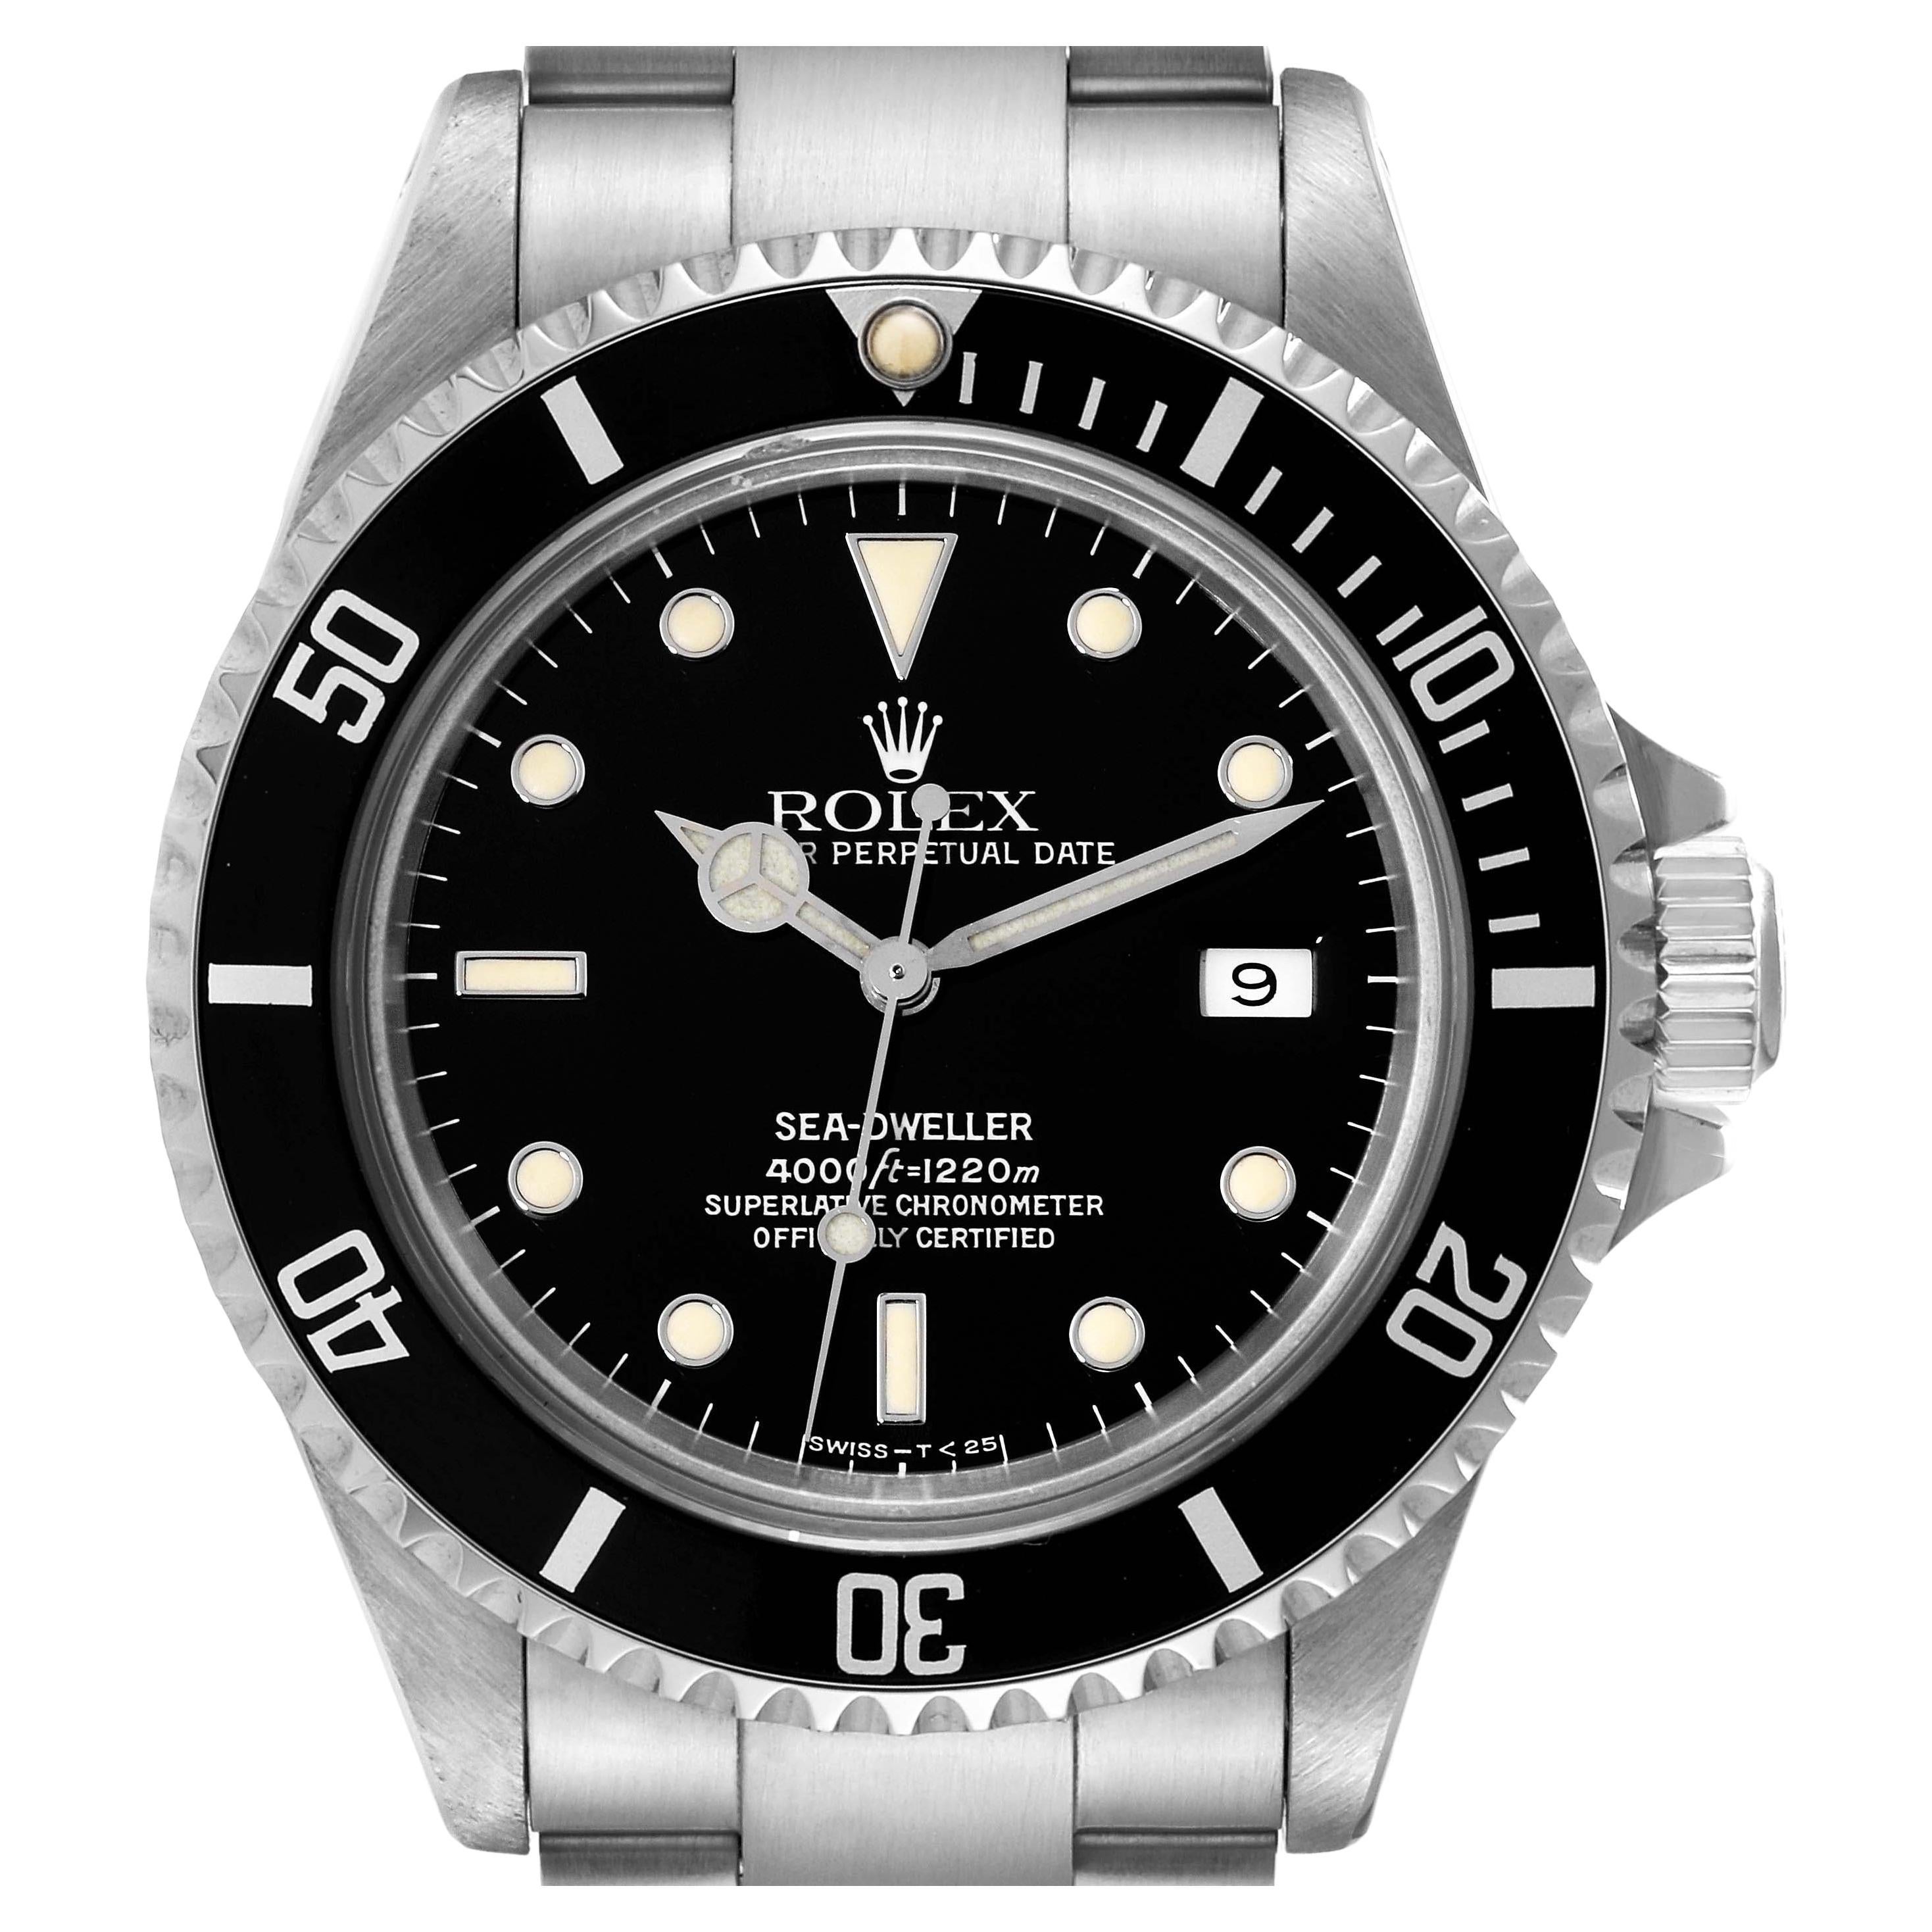 How thick is the Rolex Sea-Dweller Deepsea?